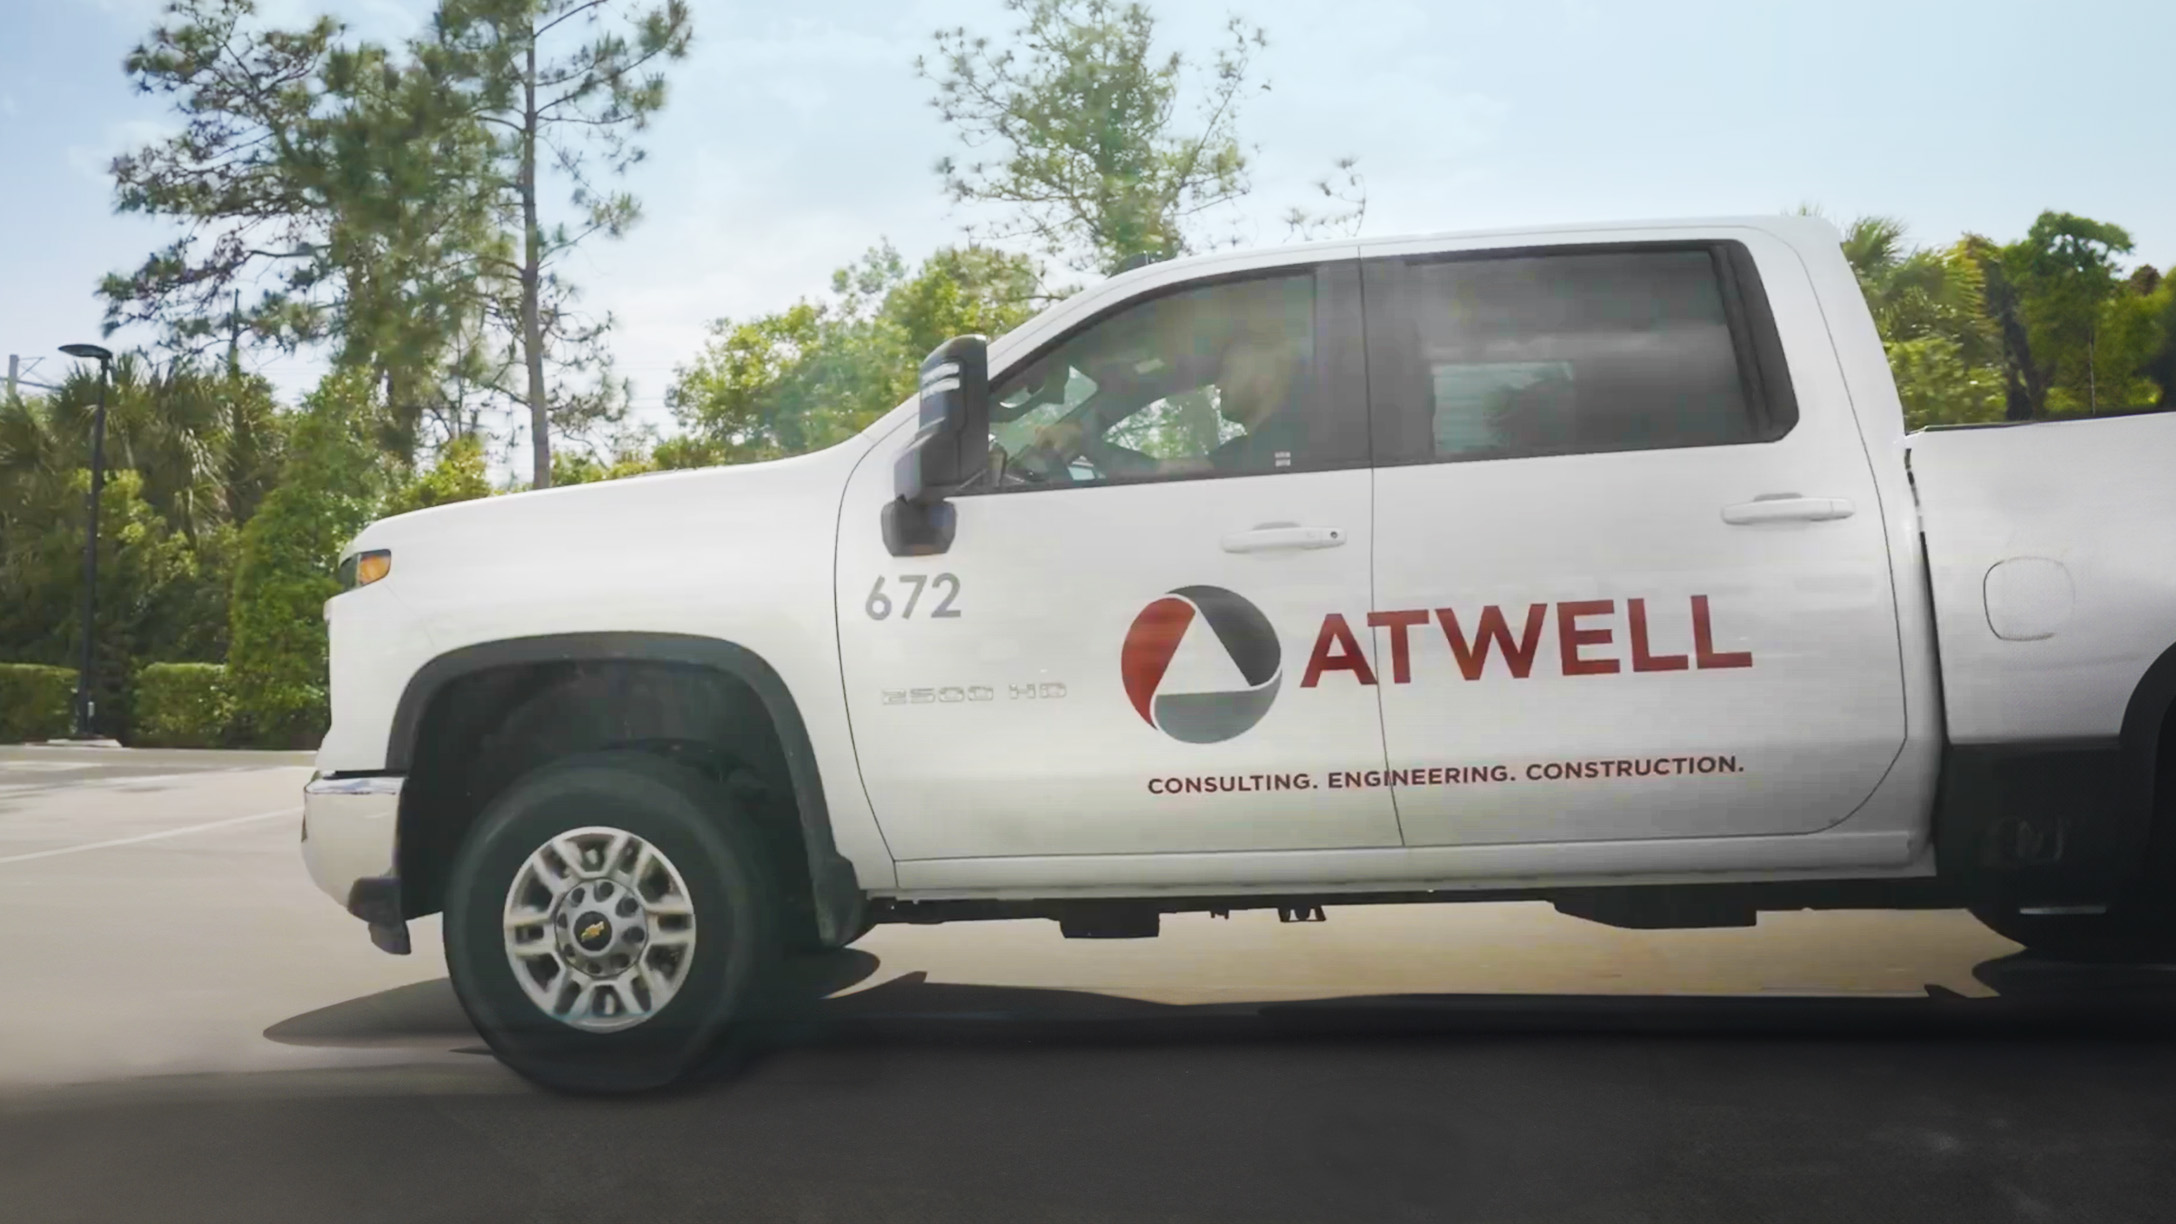 Side view image of a pick up truck with atwell group branding